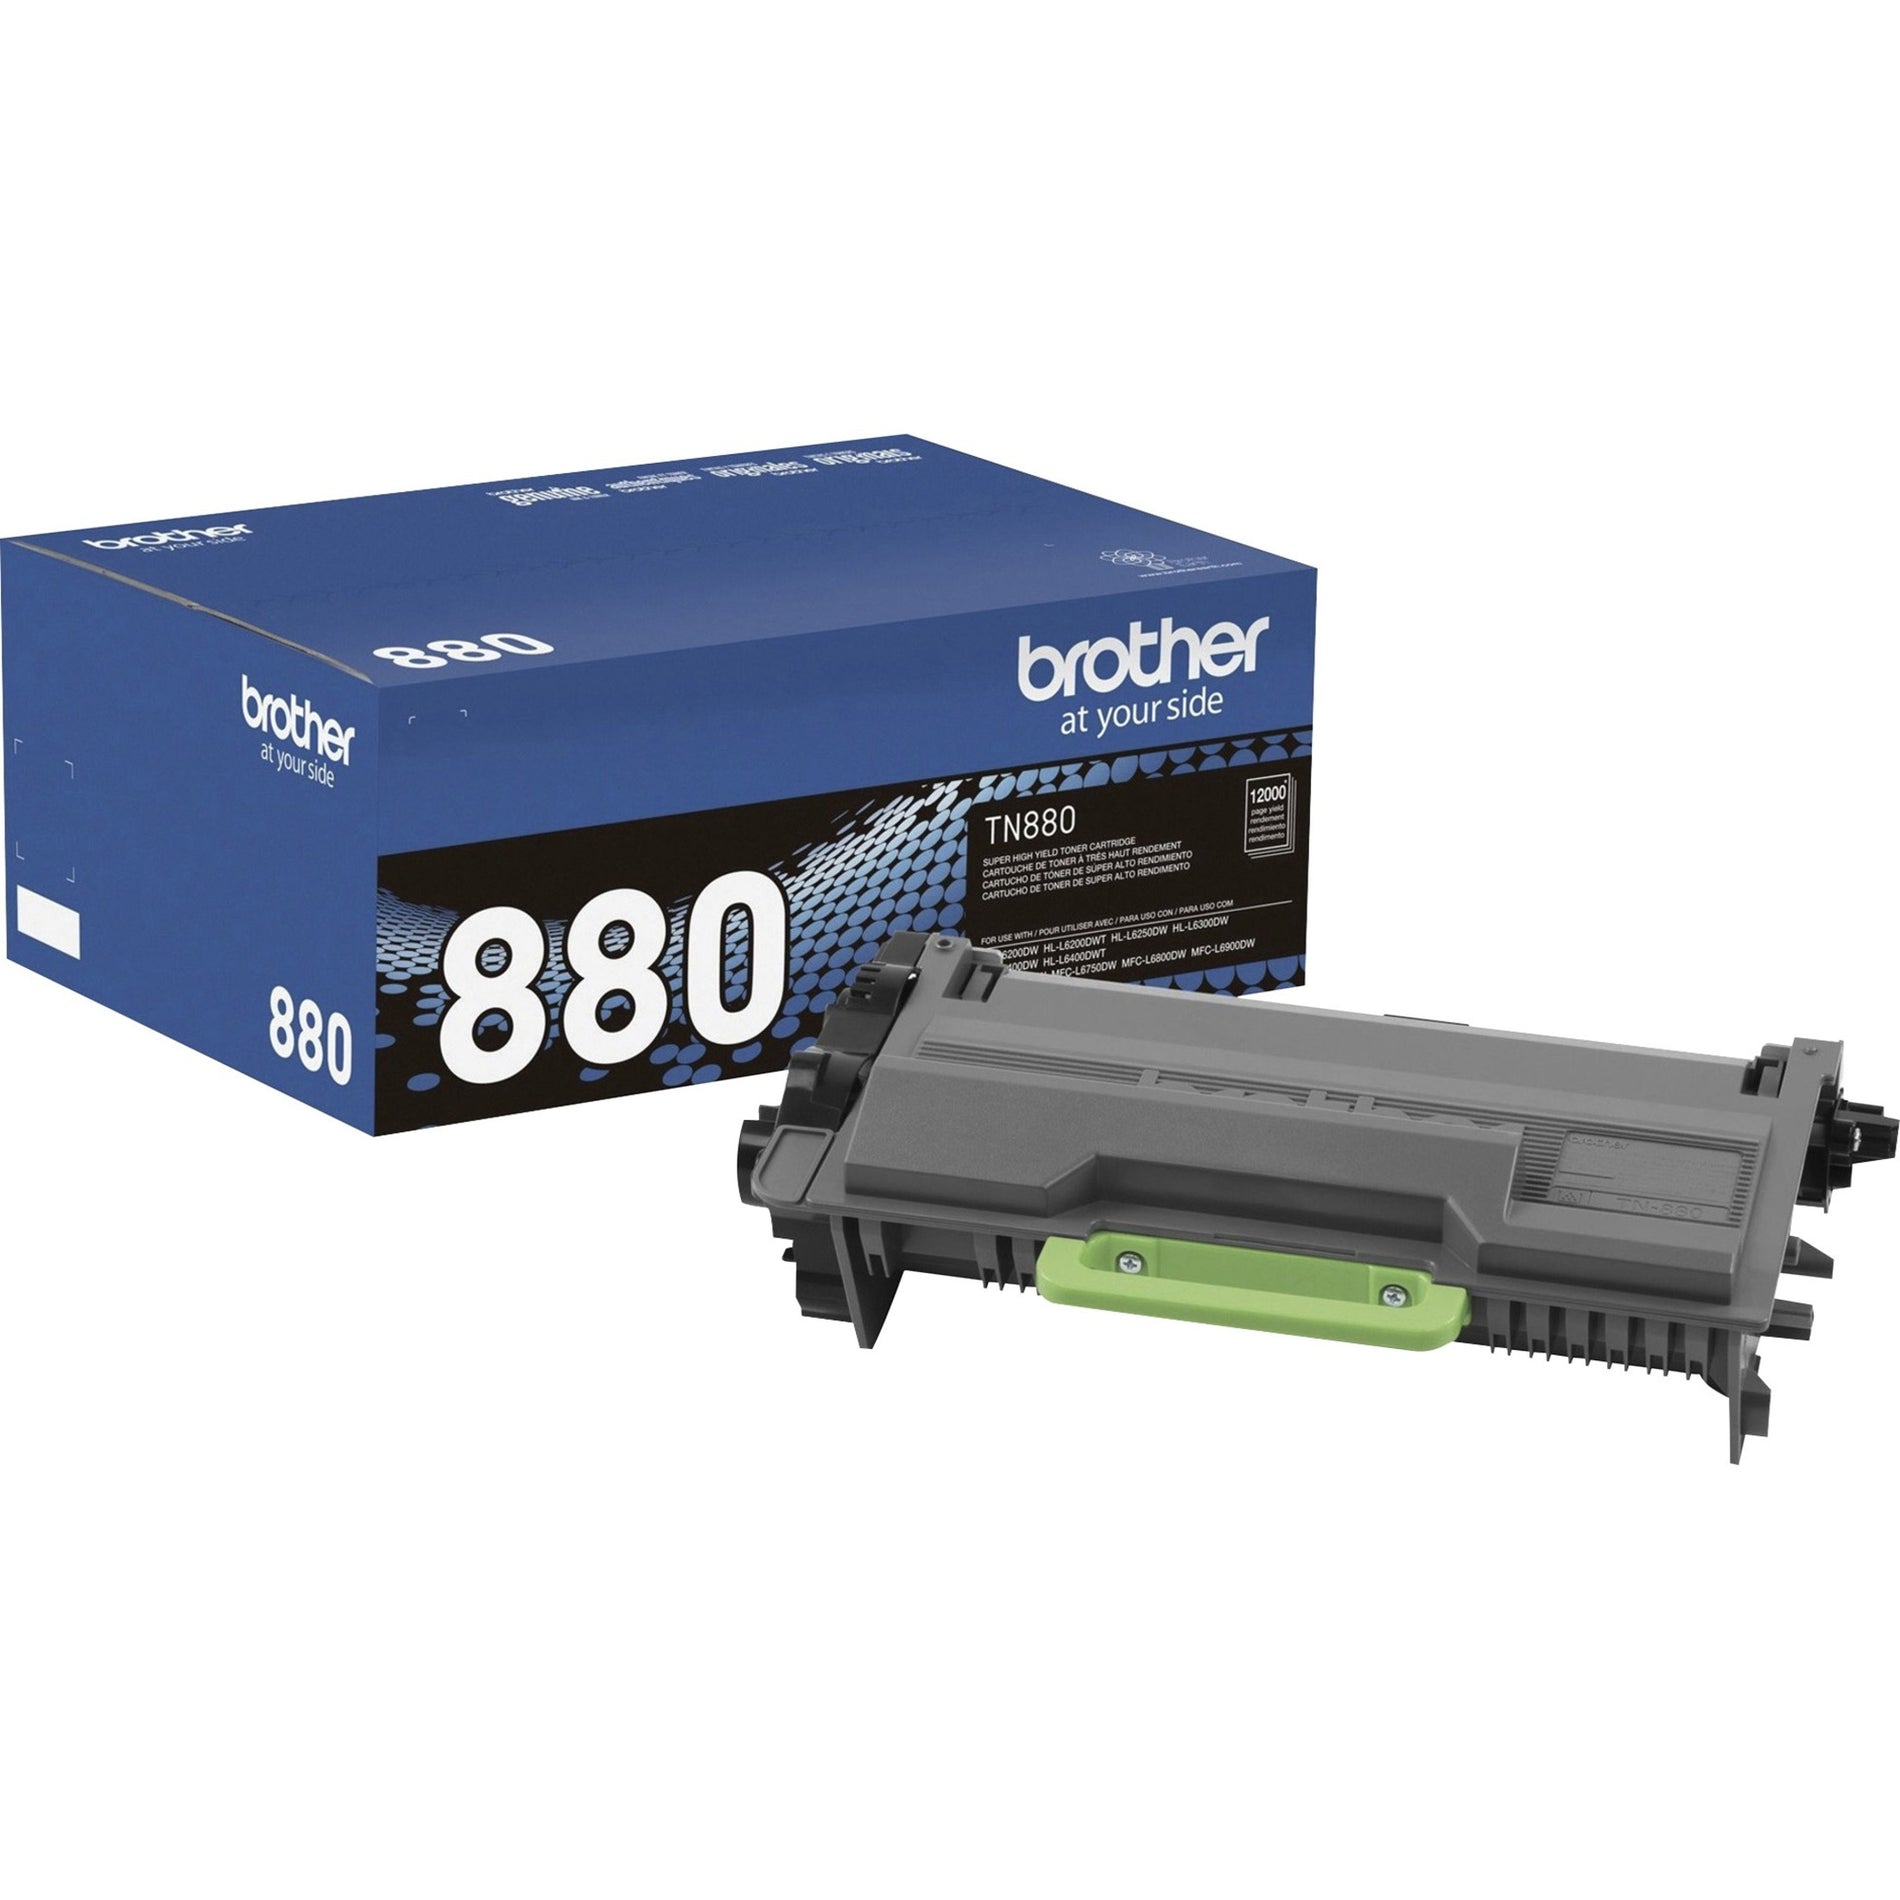 Brother TN880 Super High-yield Toner Cartridge, Black, 12,000 Pages